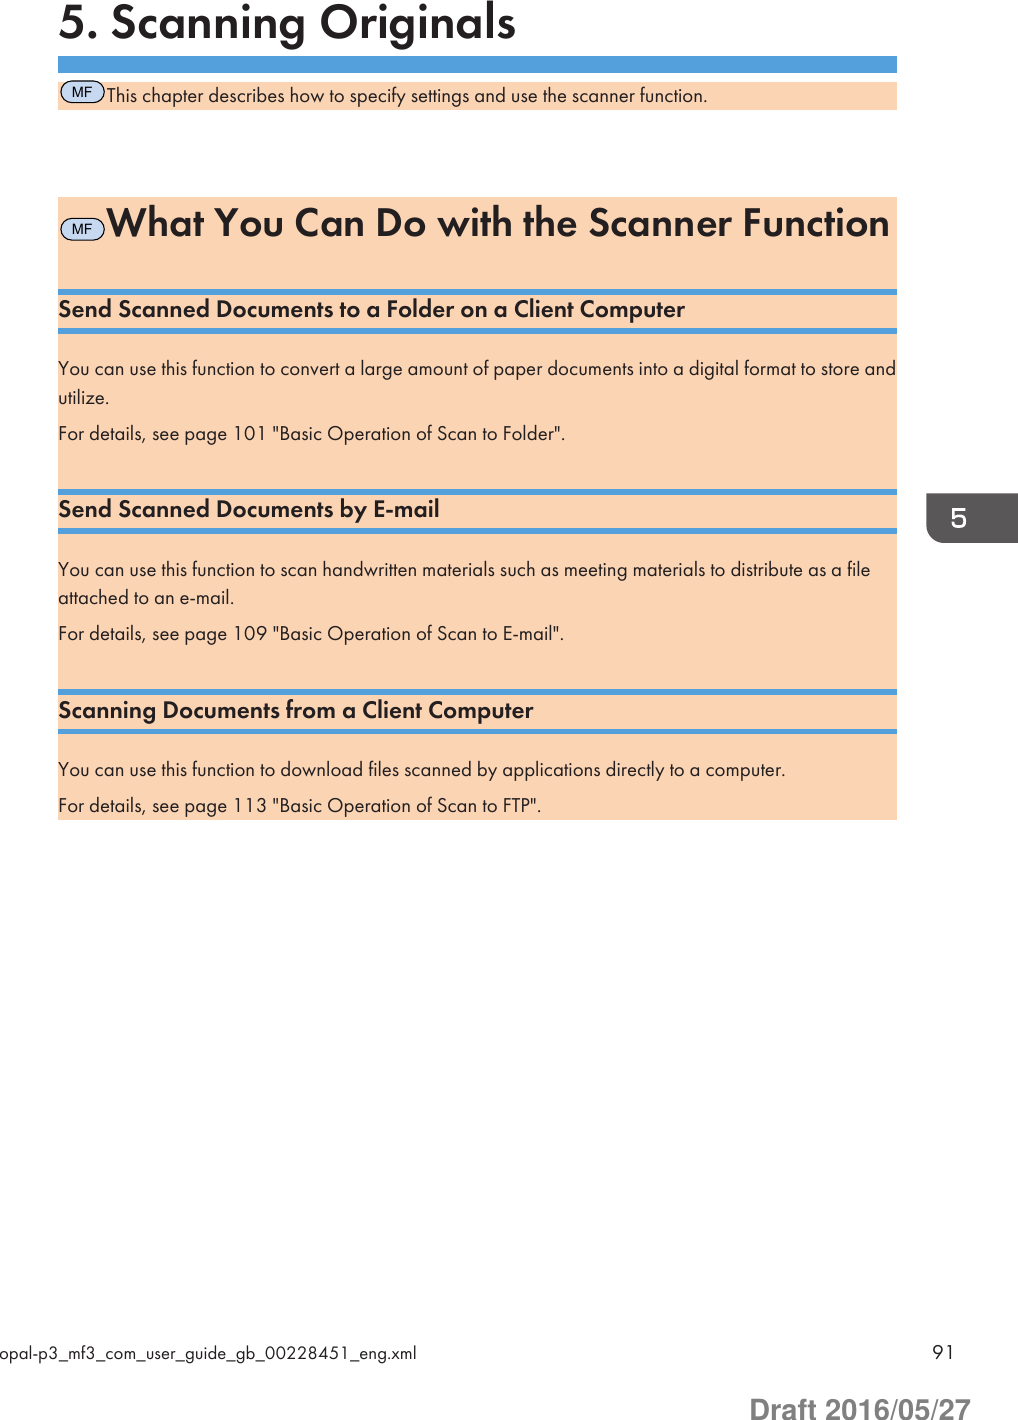 5. Scanning OriginalsMFThis chapter describes how to specify settings and use the scanner function.MFWhat You Can Do with the Scanner FunctionSend Scanned Documents to a Folder on a Client ComputerYou can use this function to convert a large amount of paper documents into a digital format to store andutilize.For details, see page 101 &quot;Basic Operation of Scan to Folder&quot;.Send Scanned Documents by E-mailYou can use this function to scan handwritten materials such as meeting materials to distribute as a fileattached to an e-mail.For details, see page 109 &quot;Basic Operation of Scan to E-mail&quot;.Scanning Documents from a Client ComputerYou can use this function to download files scanned by applications directly to a computer.For details, see page 113 &quot;Basic Operation of Scan to FTP&quot;.opal-p3_mf3_com_user_guide_gb_00228451_eng.xml 91Draft 2016/05/27